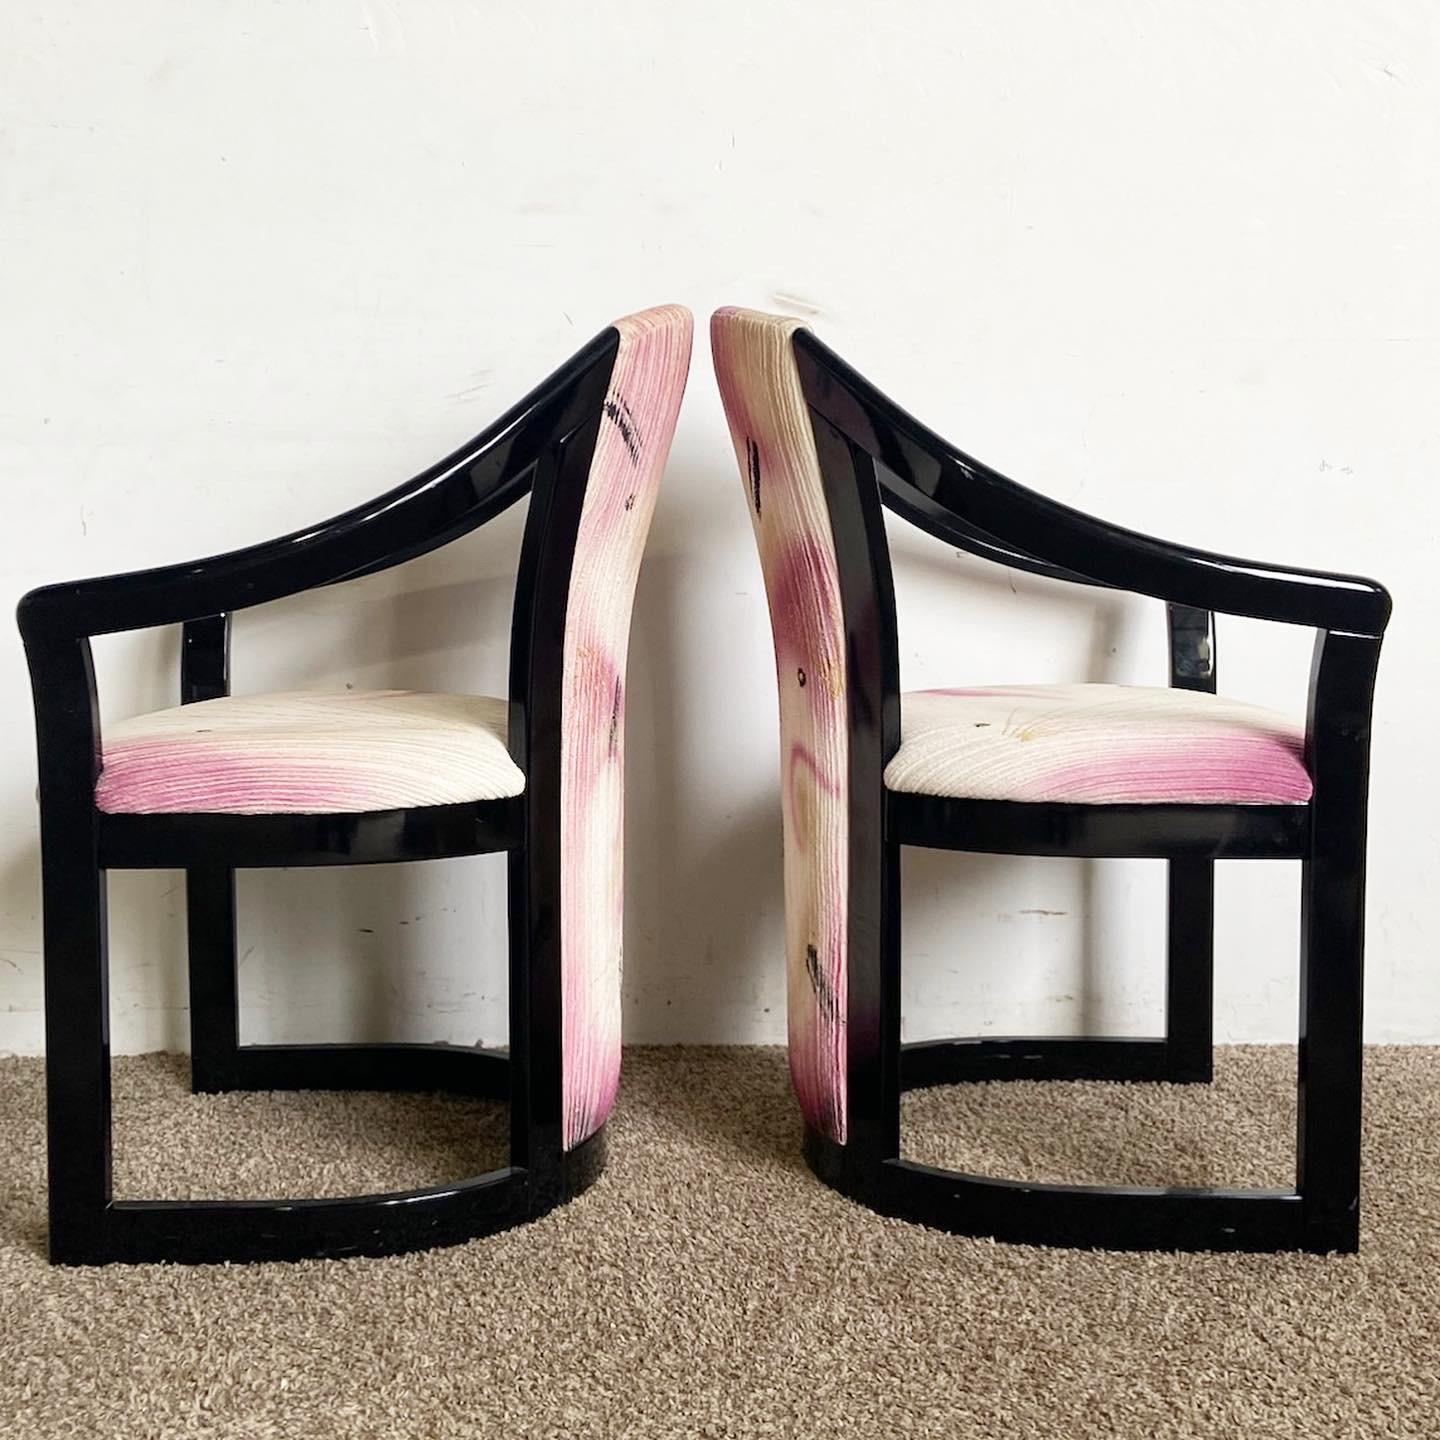 Introducing this set of four Post-Modern Postmodern Black and Pink Arm Chairs. Blending vibrant color with sleek design, these chairs are a statement piece for any modern interior.
Some wear around the edges as seen in the photos.